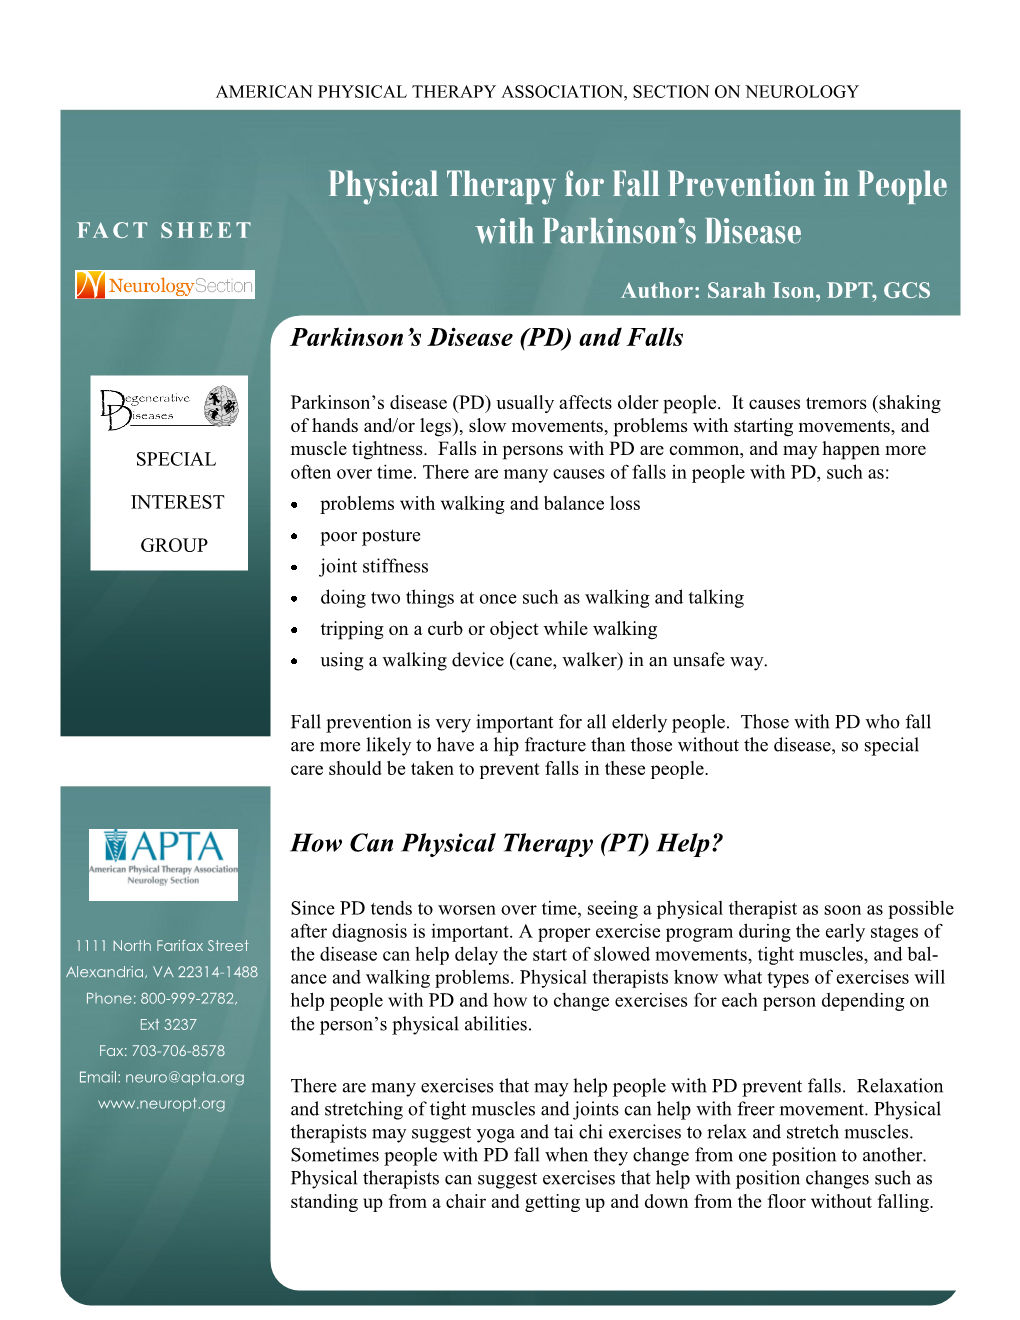 Physical Therapy for Fall Prevention in People with Parkinson's Disease